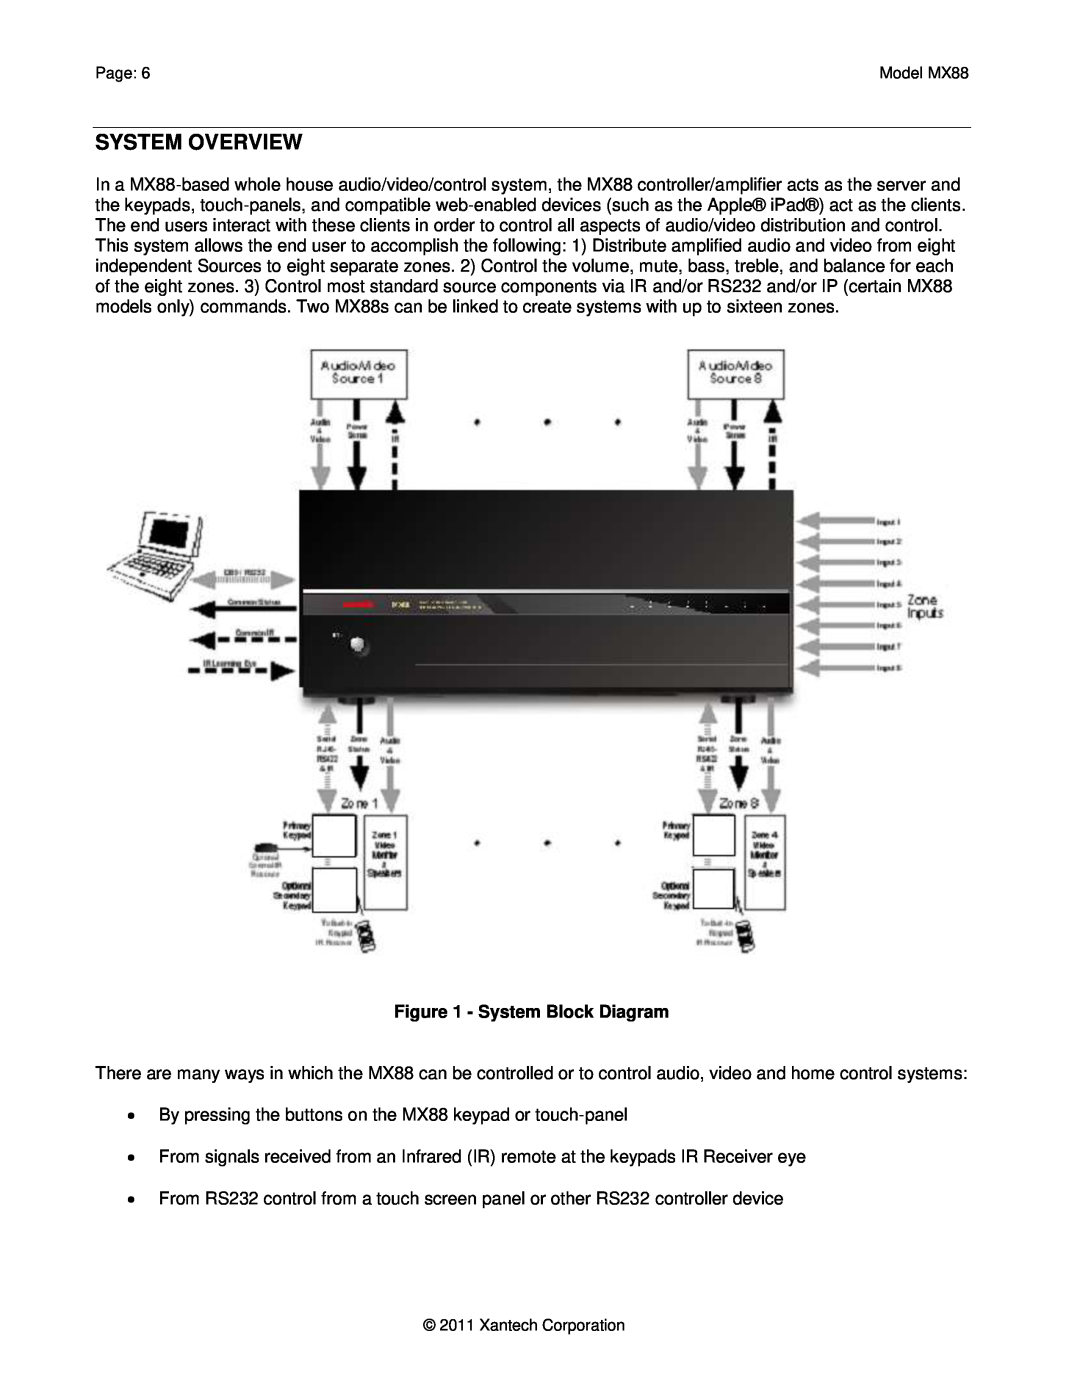 Xantech MX88 installation instructions System Overview, System Block Diagram 